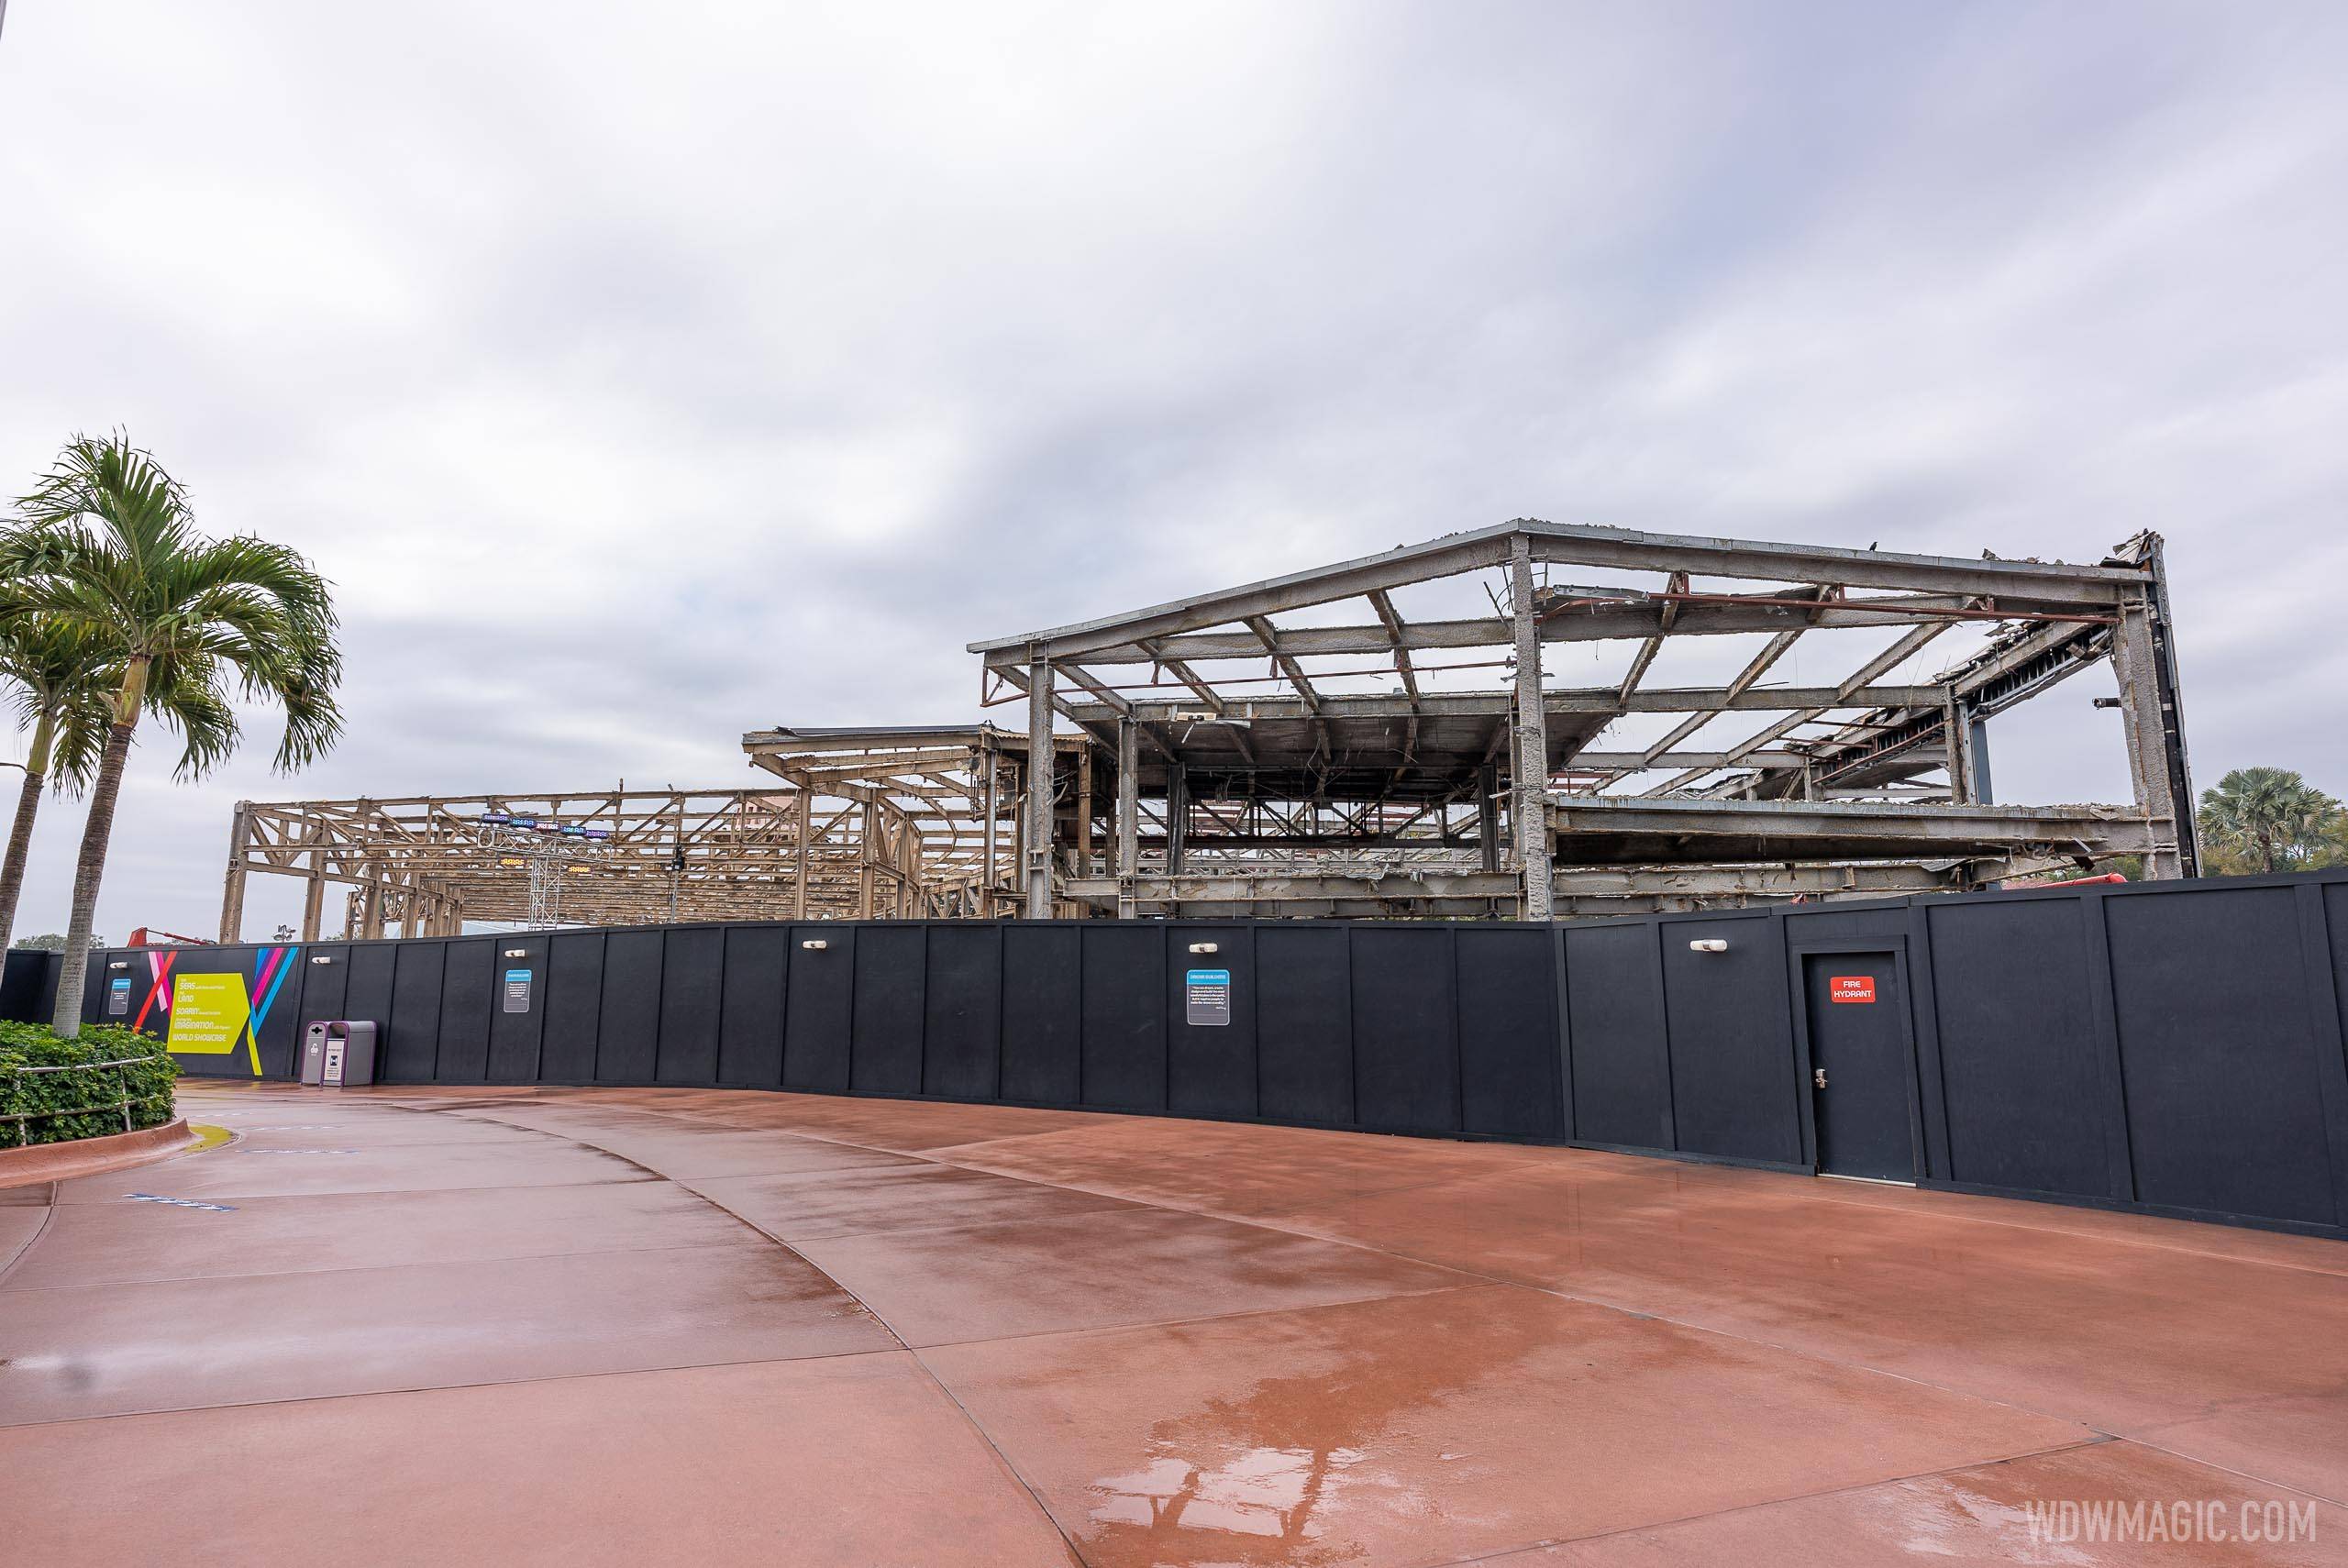 PHOTOS - Innoventions West demolition continues